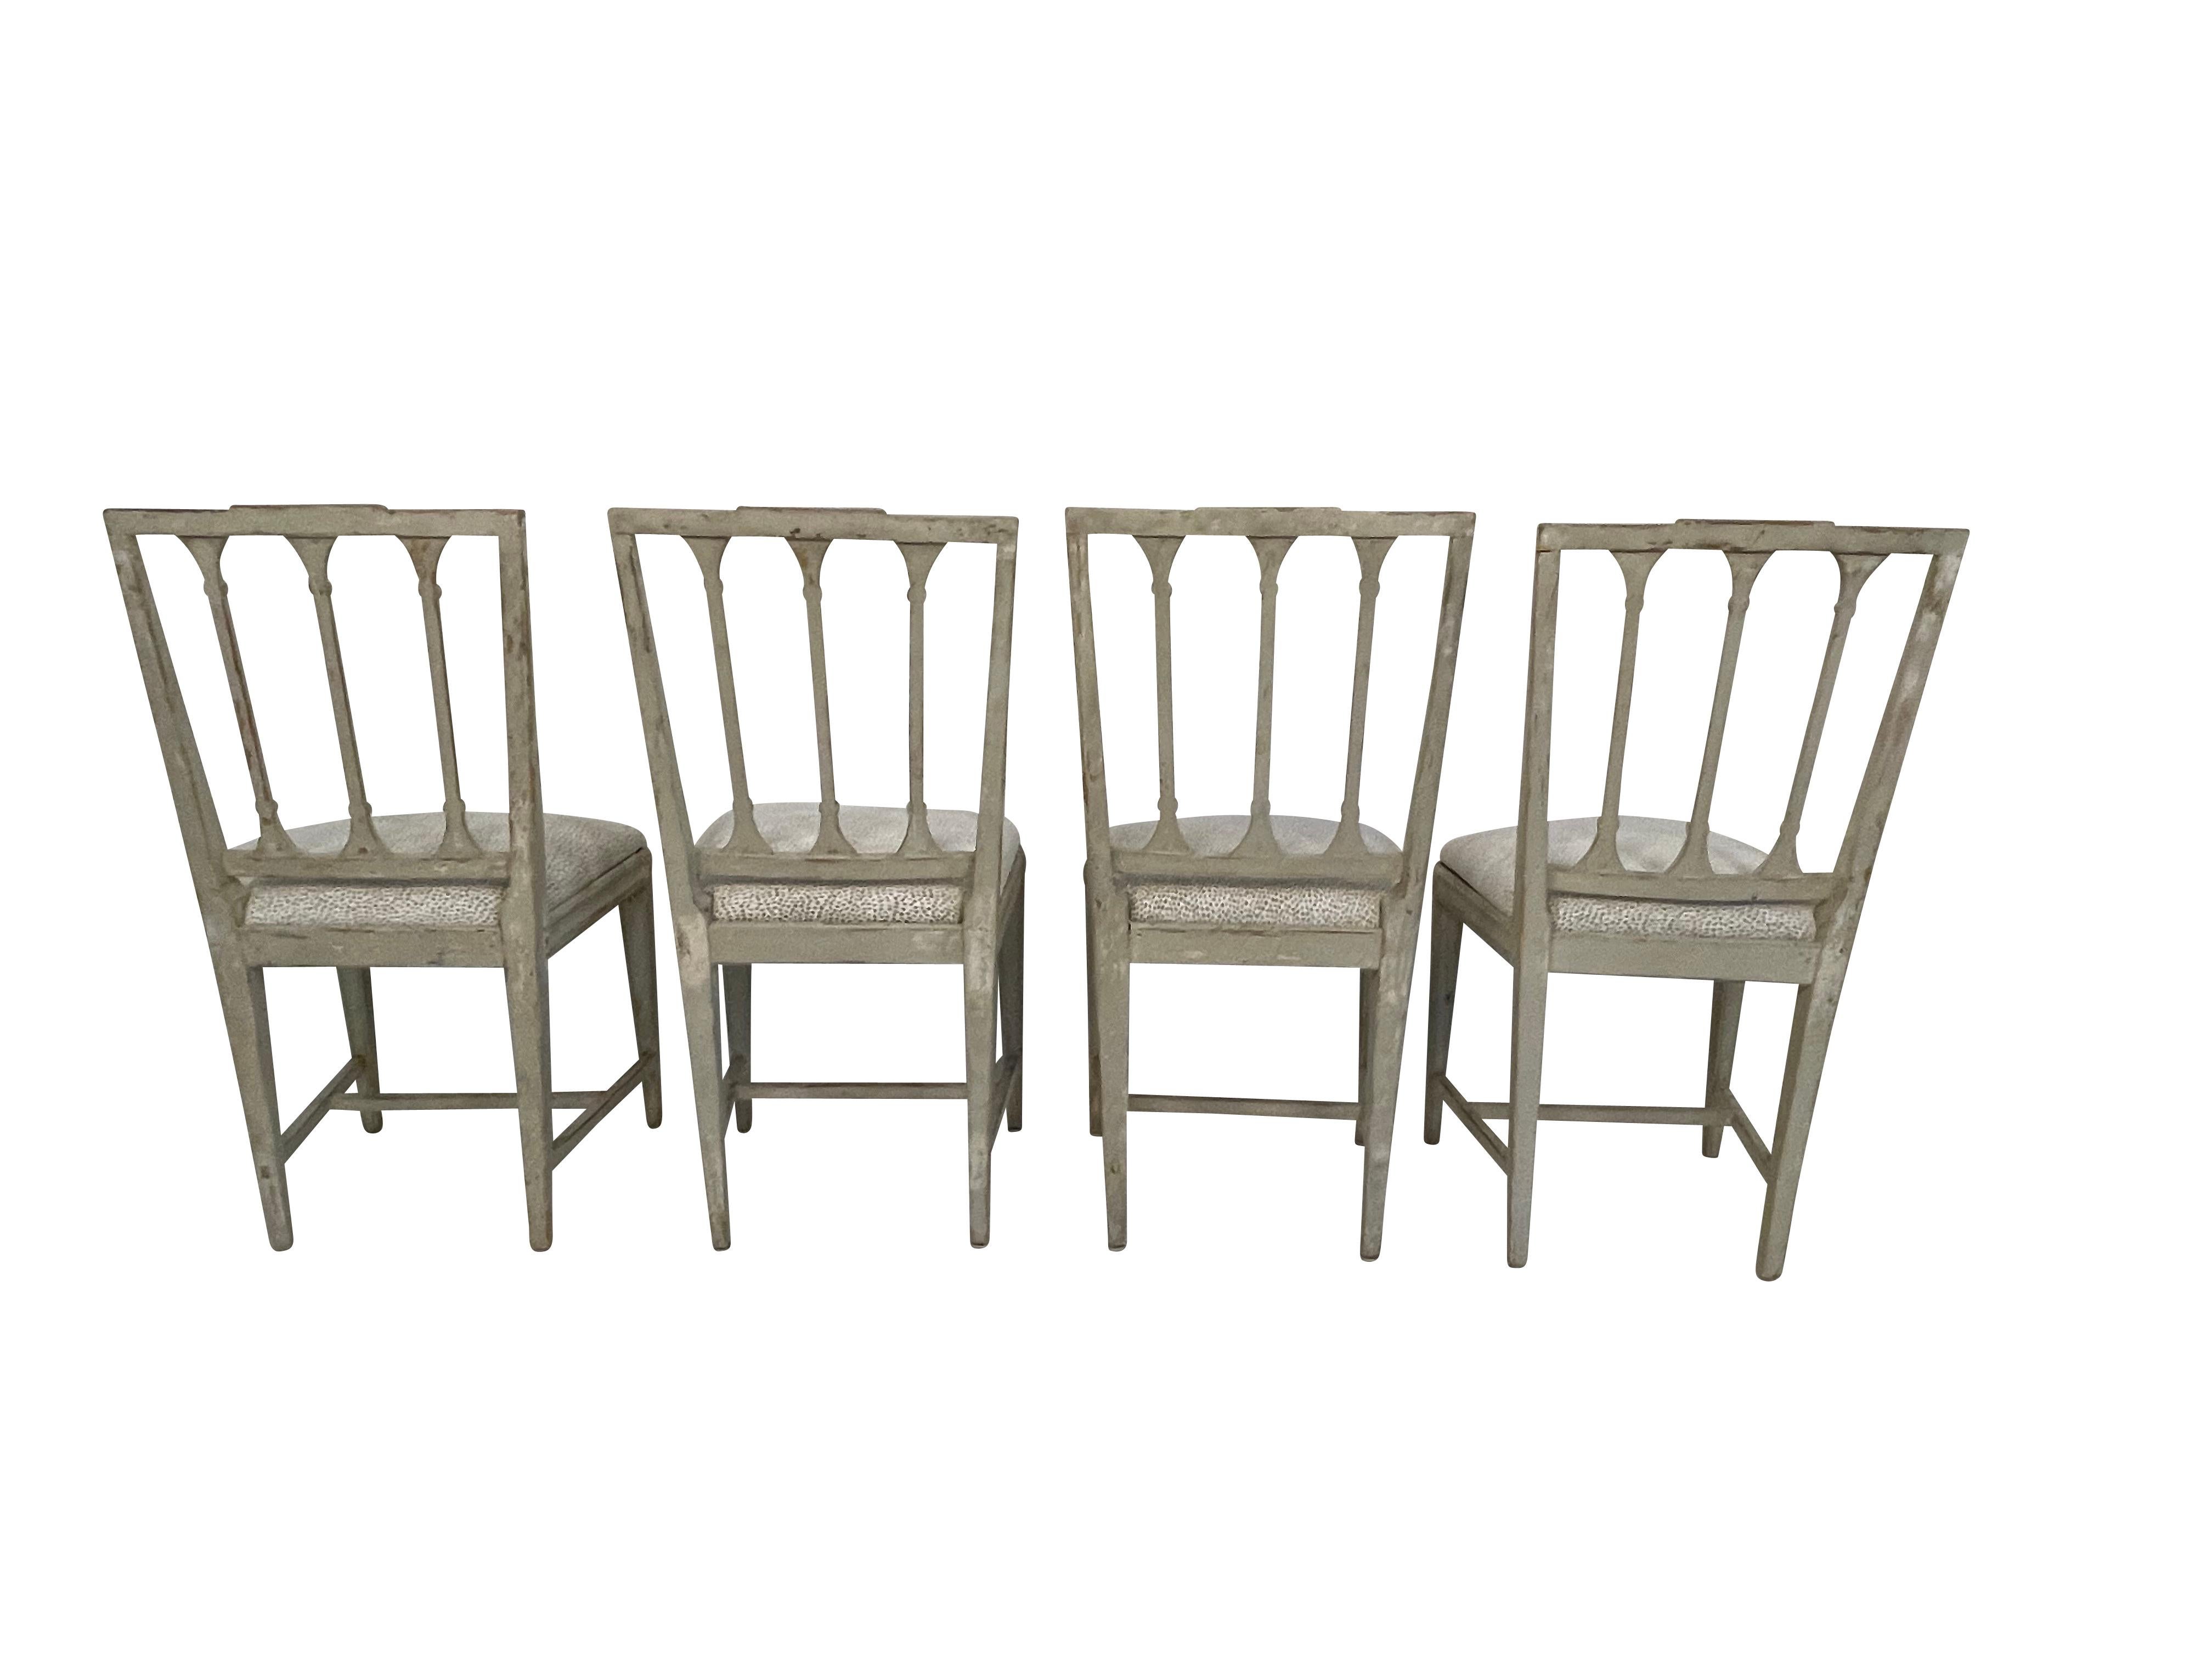 Set of Four  19th Century Swedish Neoclassical Chairs  For Sale 2